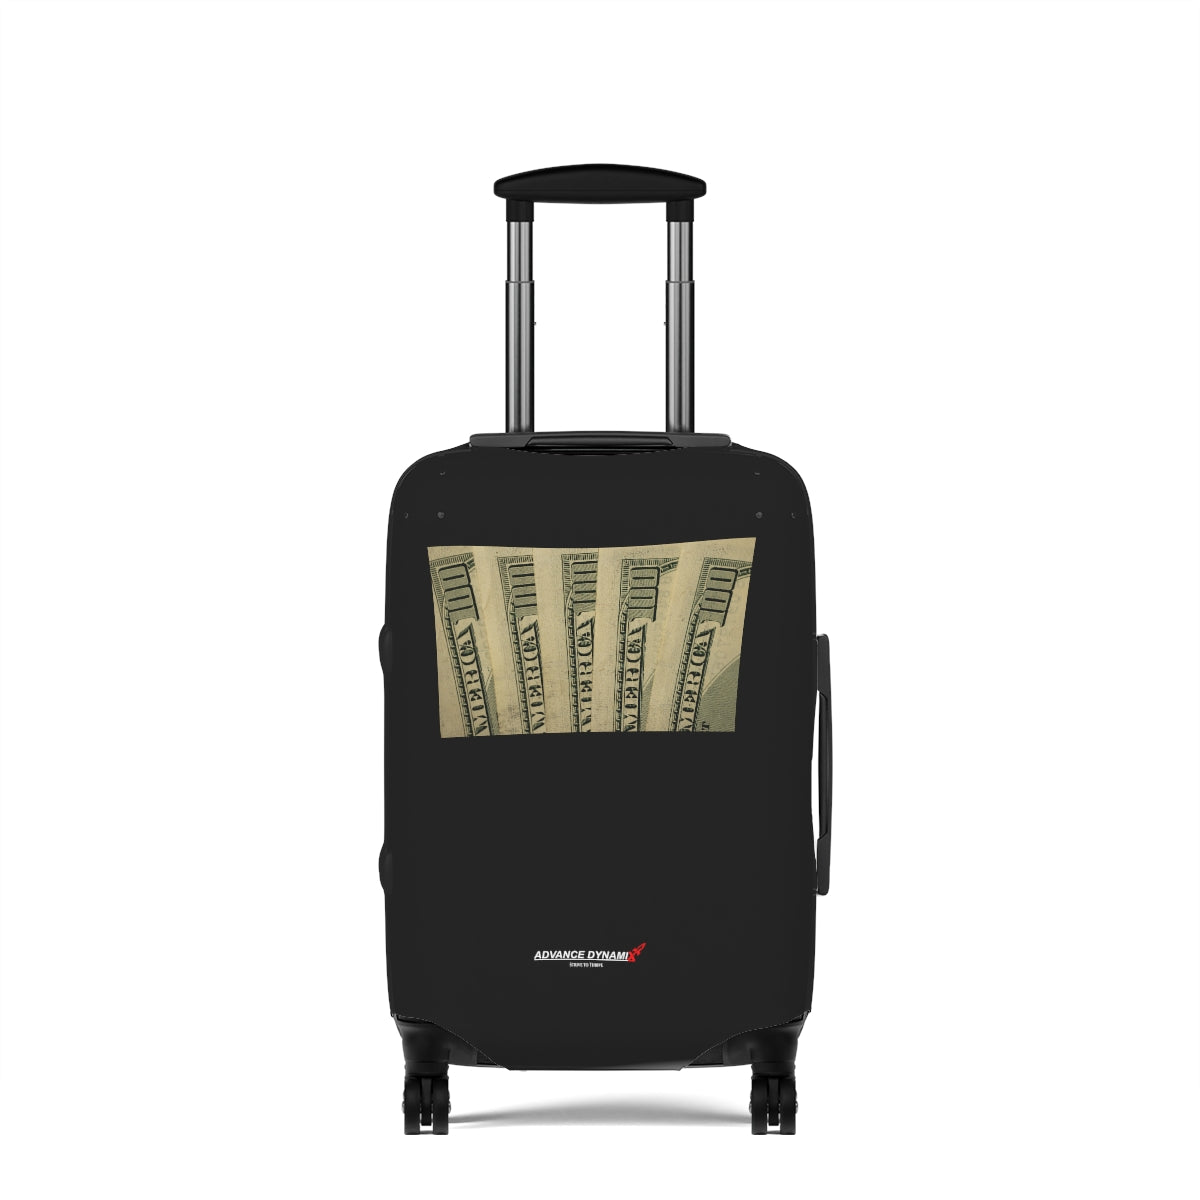 Benjamins - Luggage Covers Infused with Advance Dynamix Add-A-Tude - Tell the world!